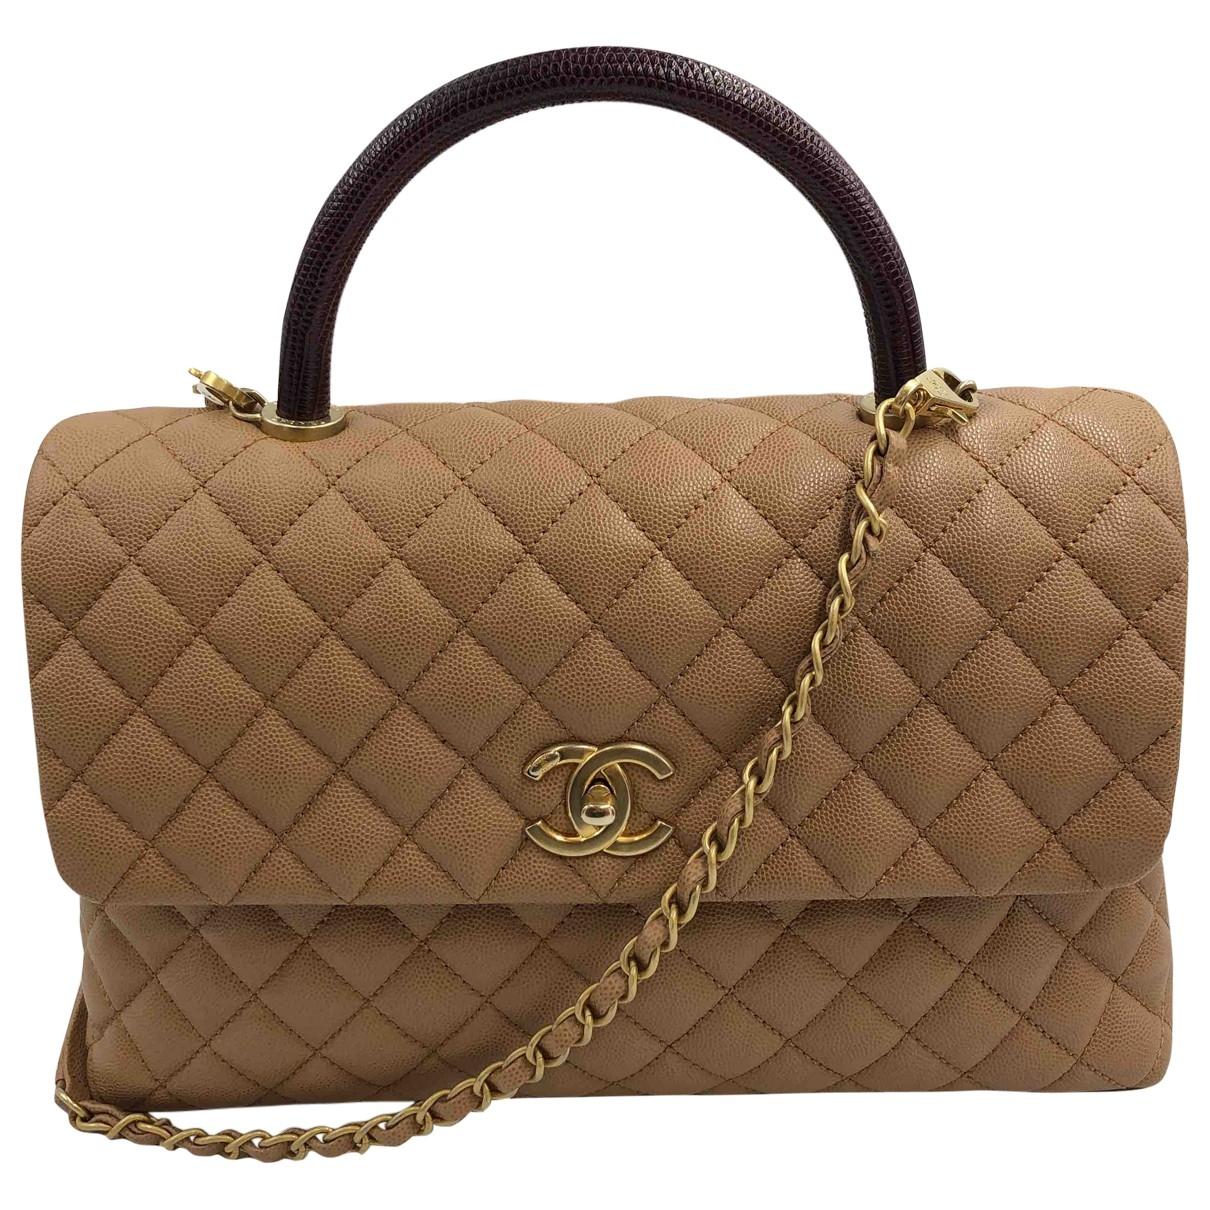 Chanel Coco Handle Leather Crossbody Bag in Brown - Lyst